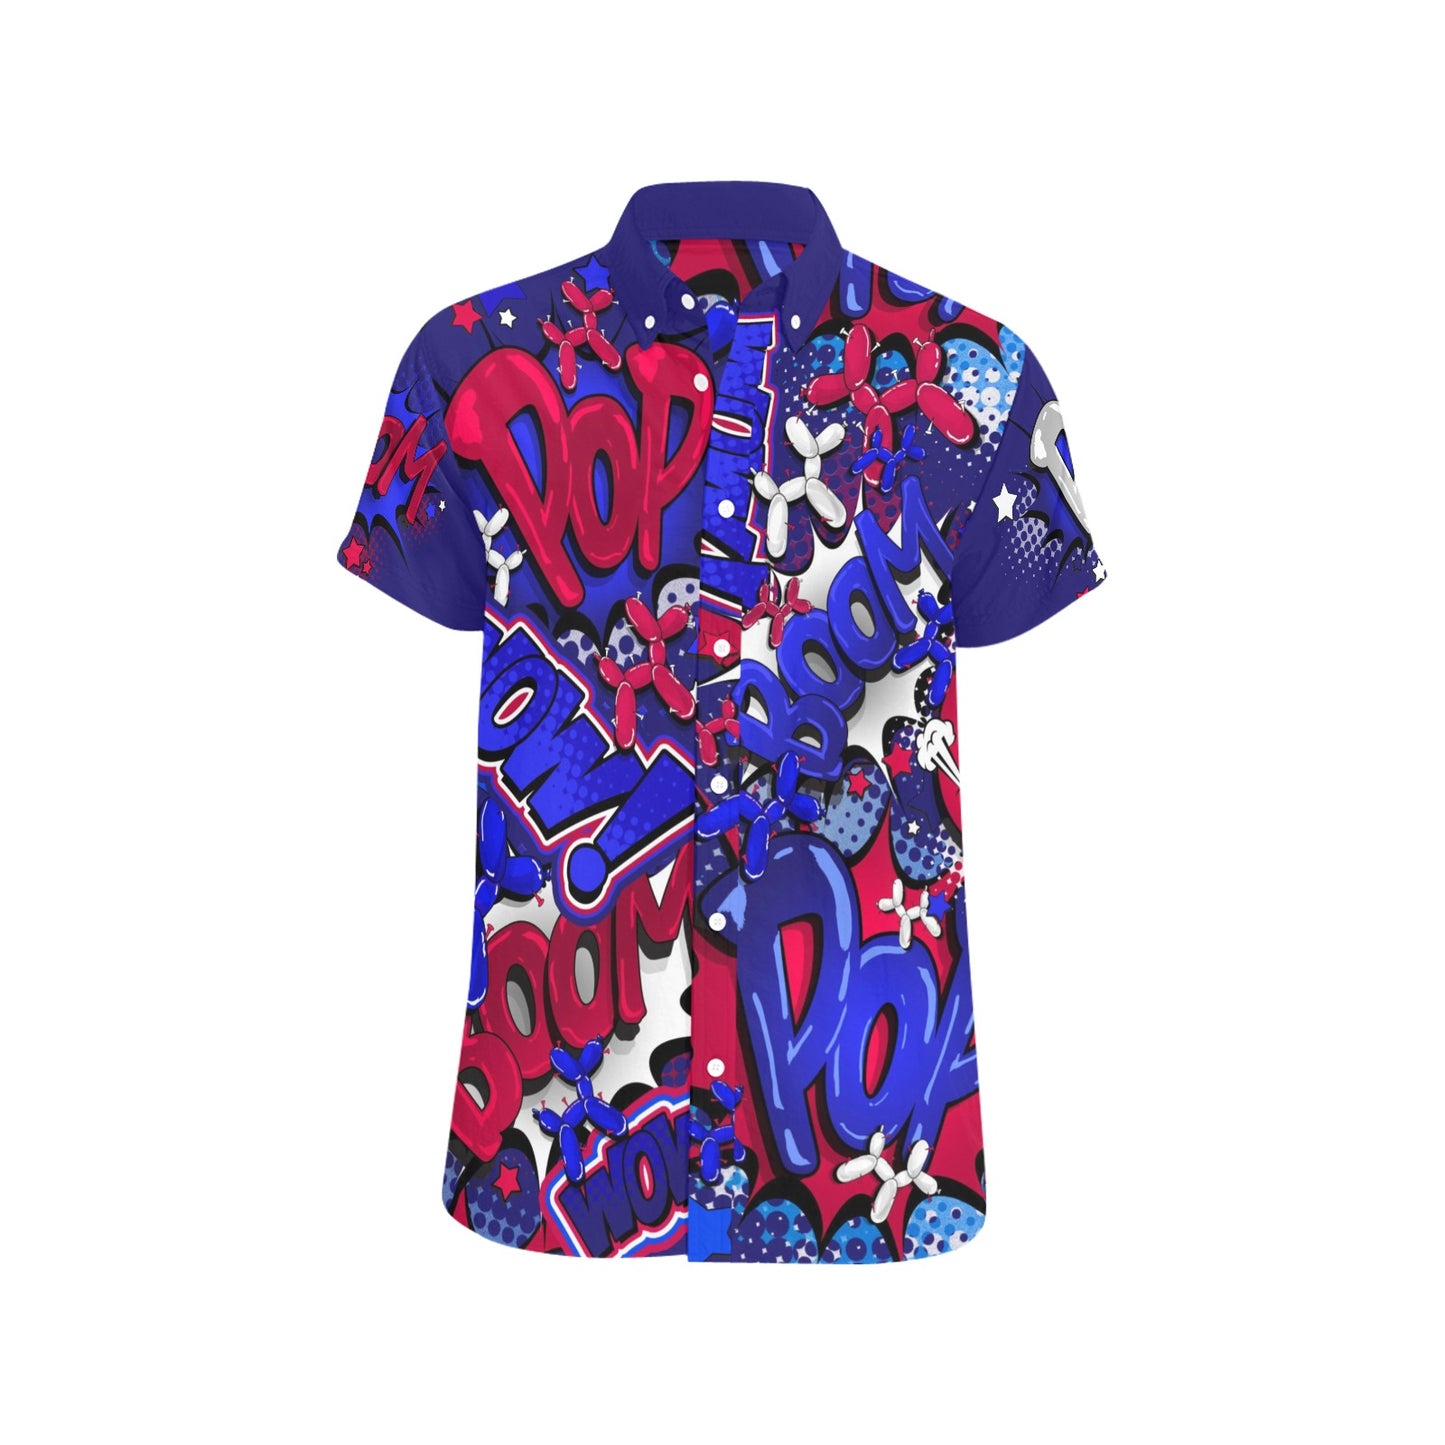 Balloon Twister shirt with balloon dogs red, white and blue